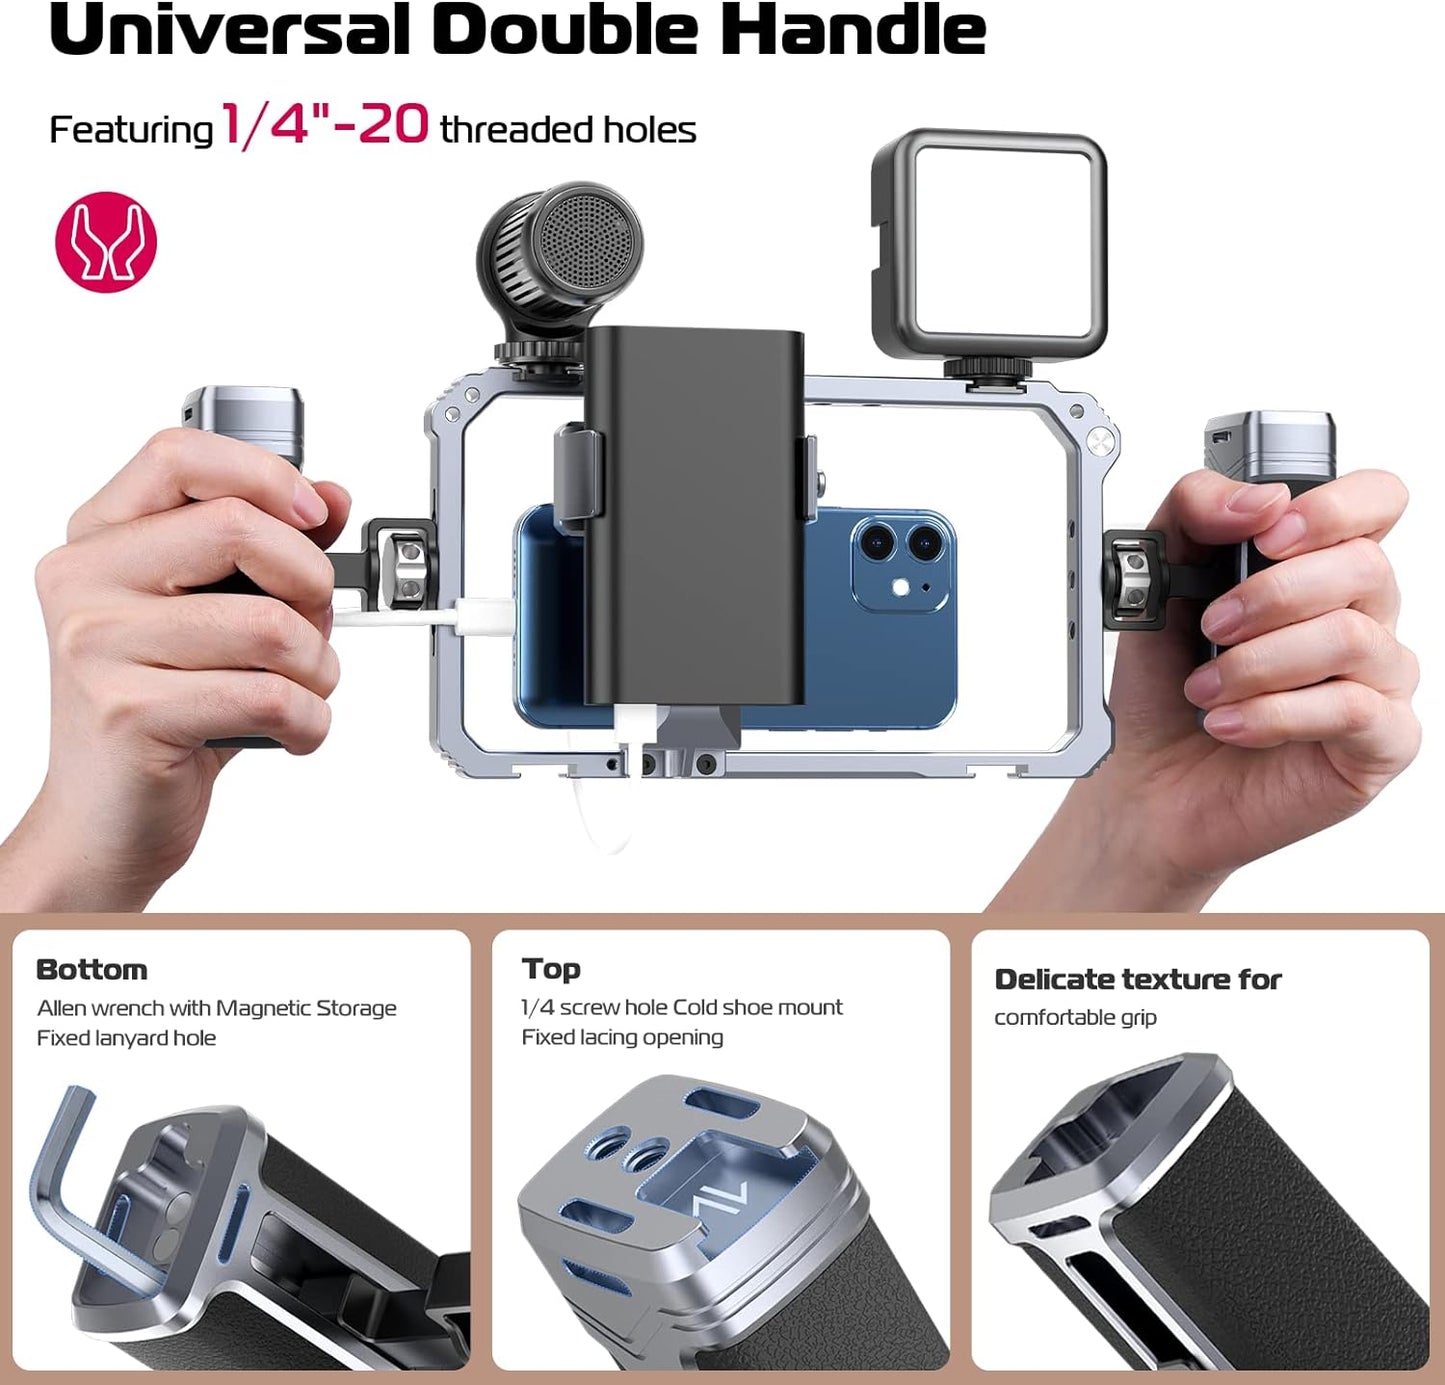 ULANZI Universal Phone Video Rig Kit with Handles, Aluminum Handheld Stabilizer Phone Video Filmmaking Grip for Video Maker Videographer with Cold Shoe for iPhone 14 13 Mini Pro Max 8 Plus